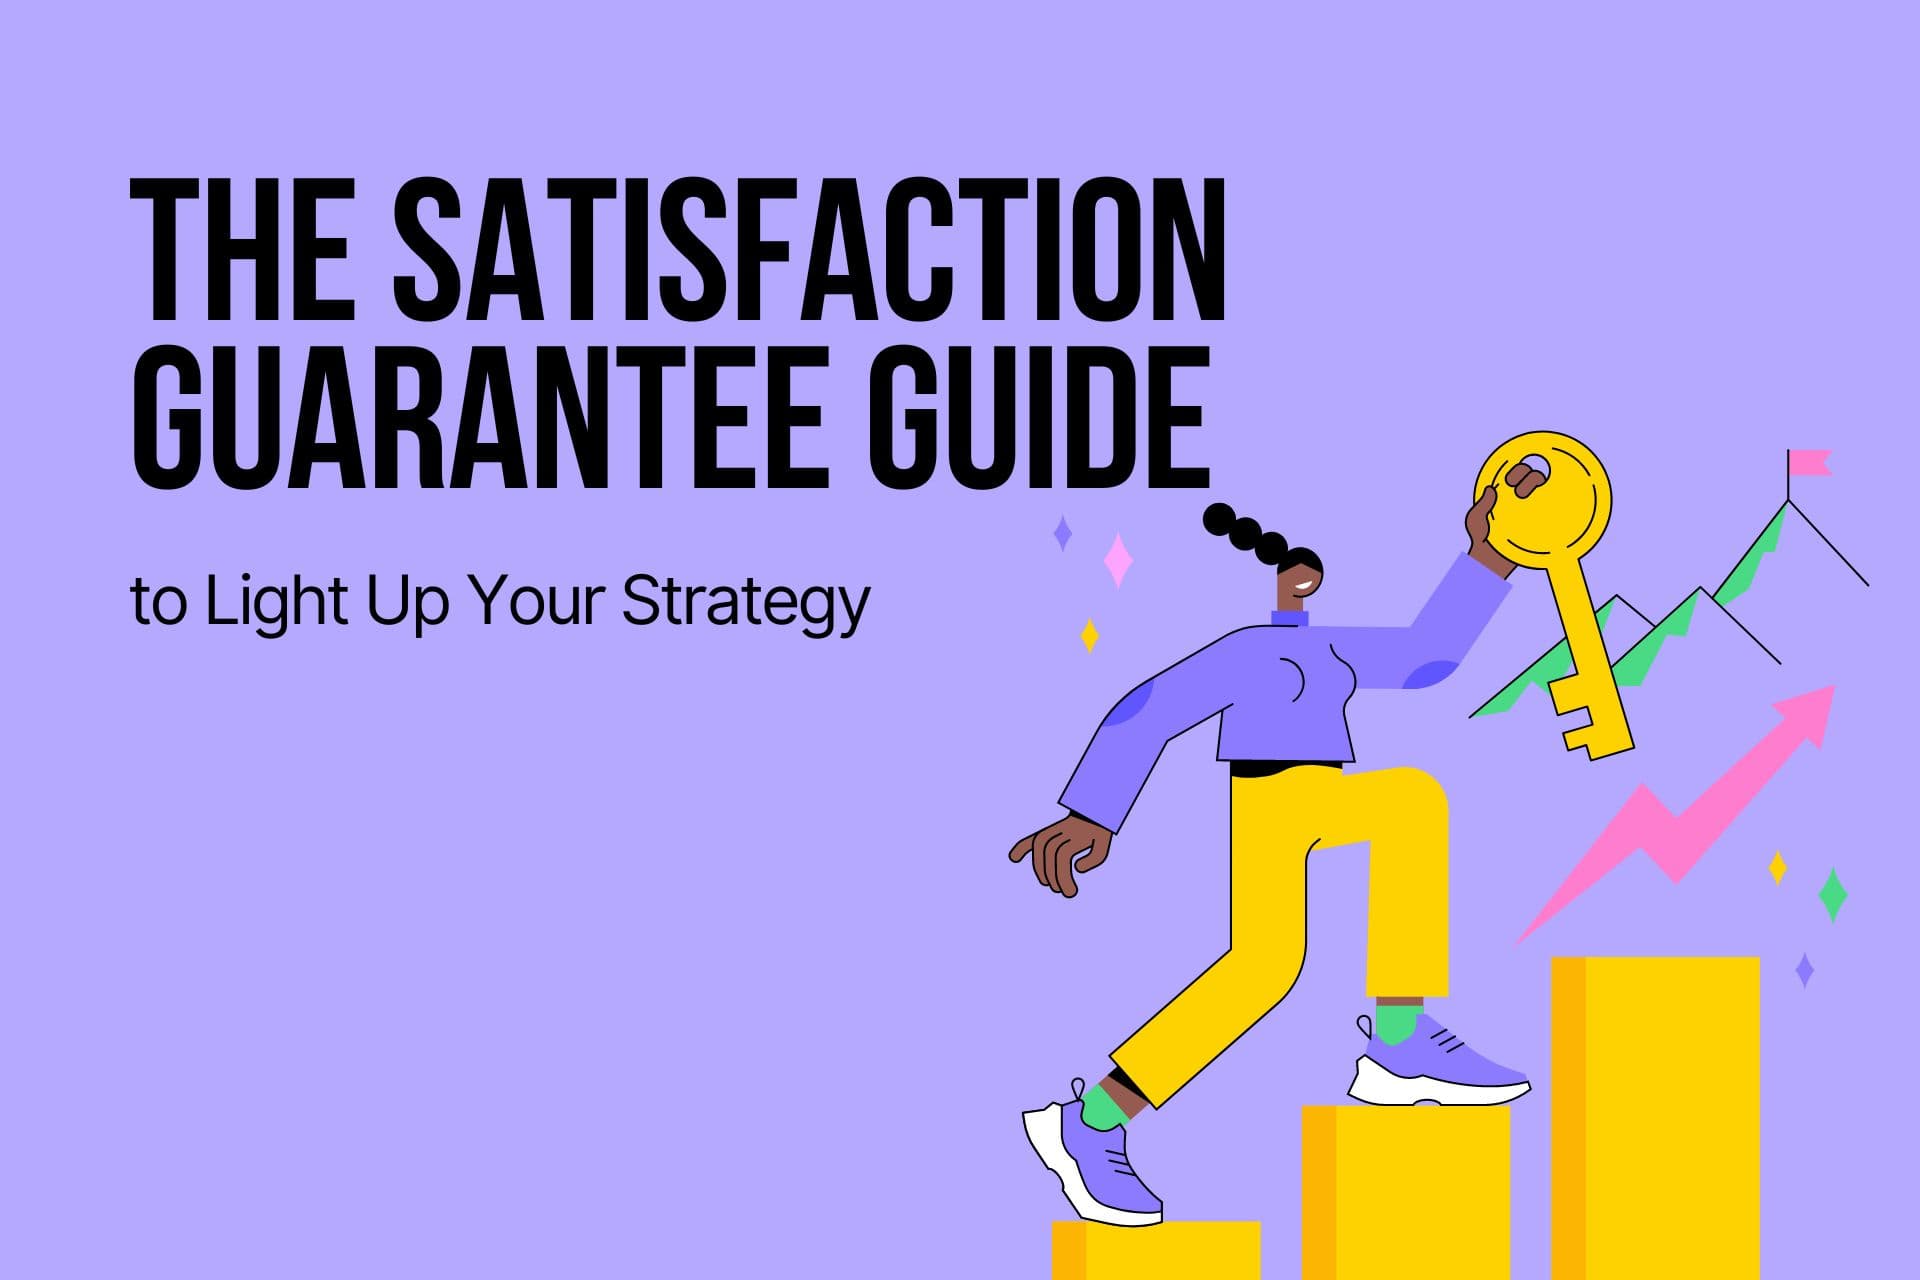 The Satisfaction Guarantee Guide to Light Up Your Strategy